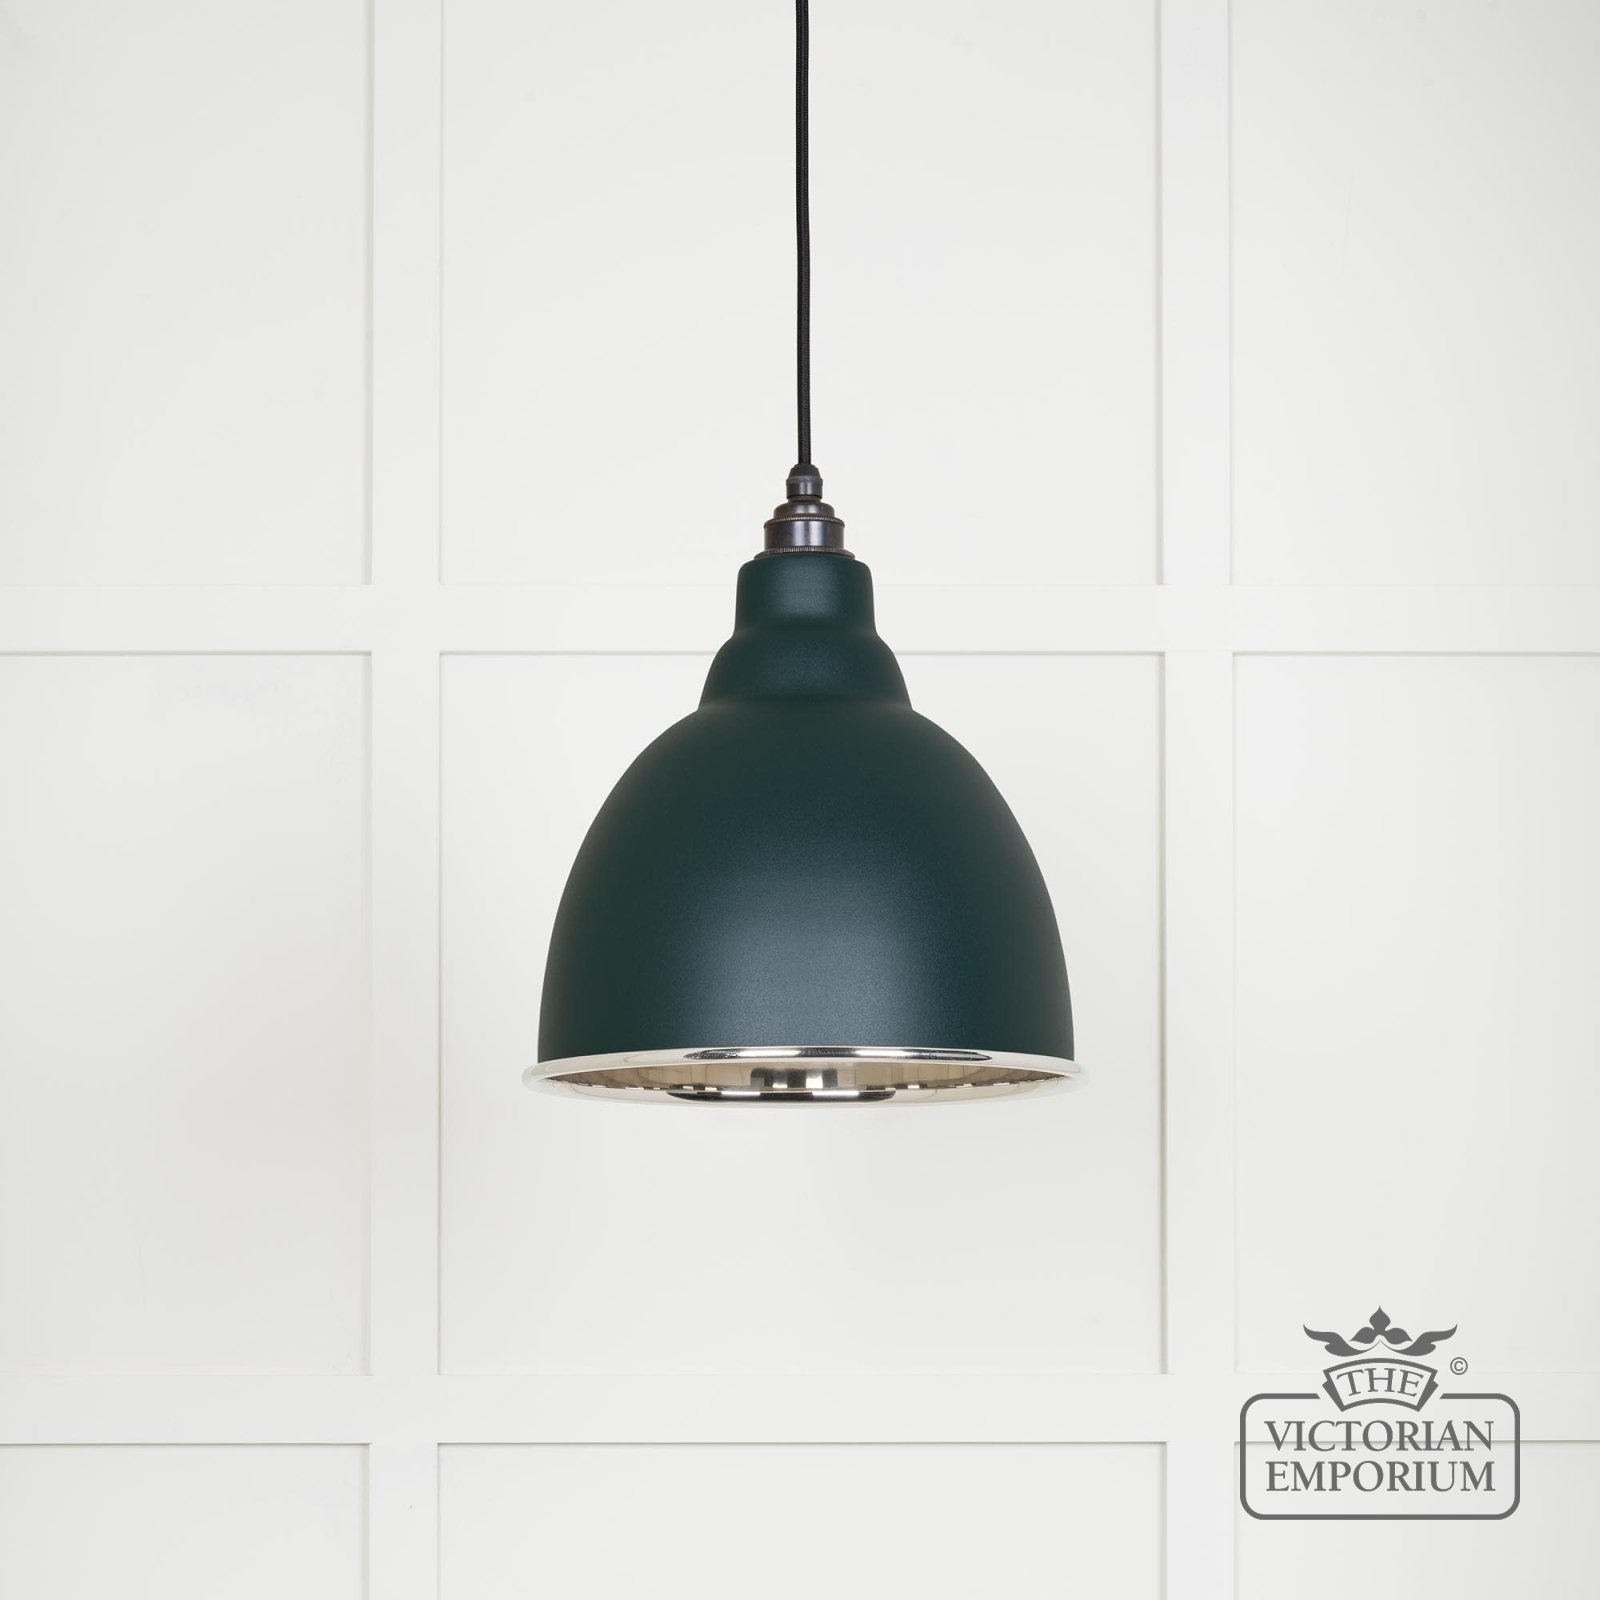 Brindle pendant light in Dingle with nickel interior